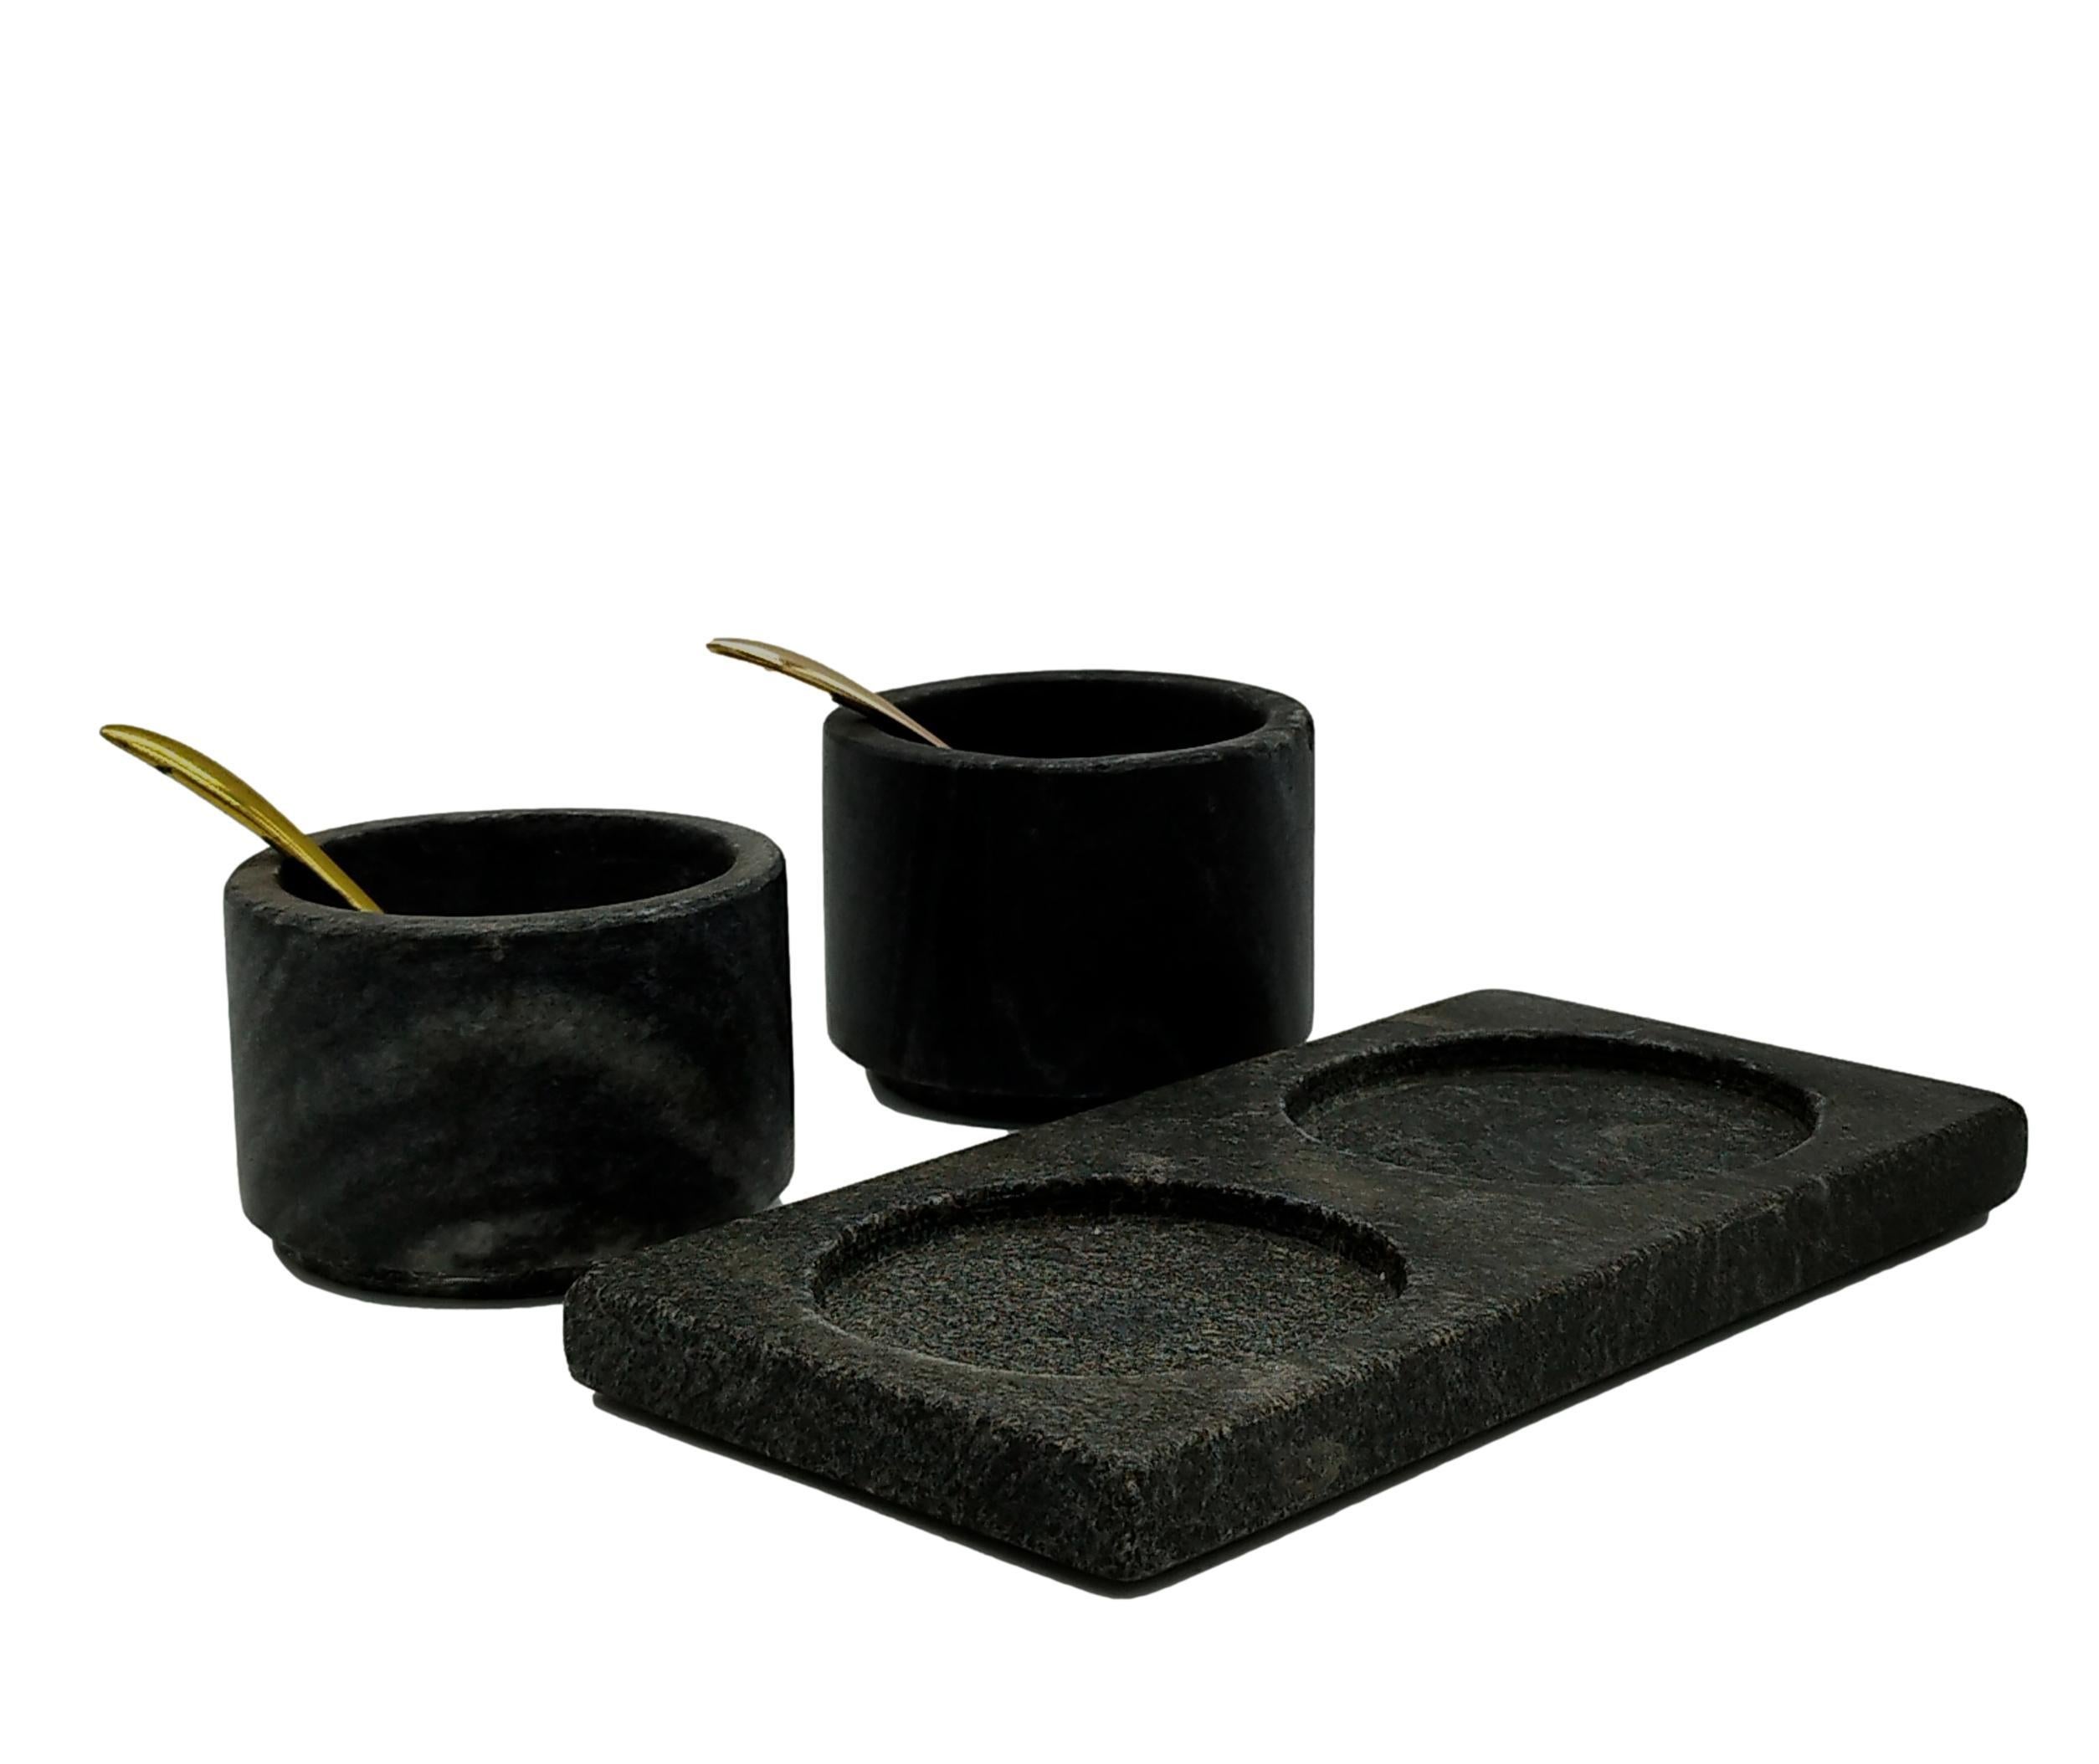 Black marble salt and pepper spice containers with brass spoons.
 